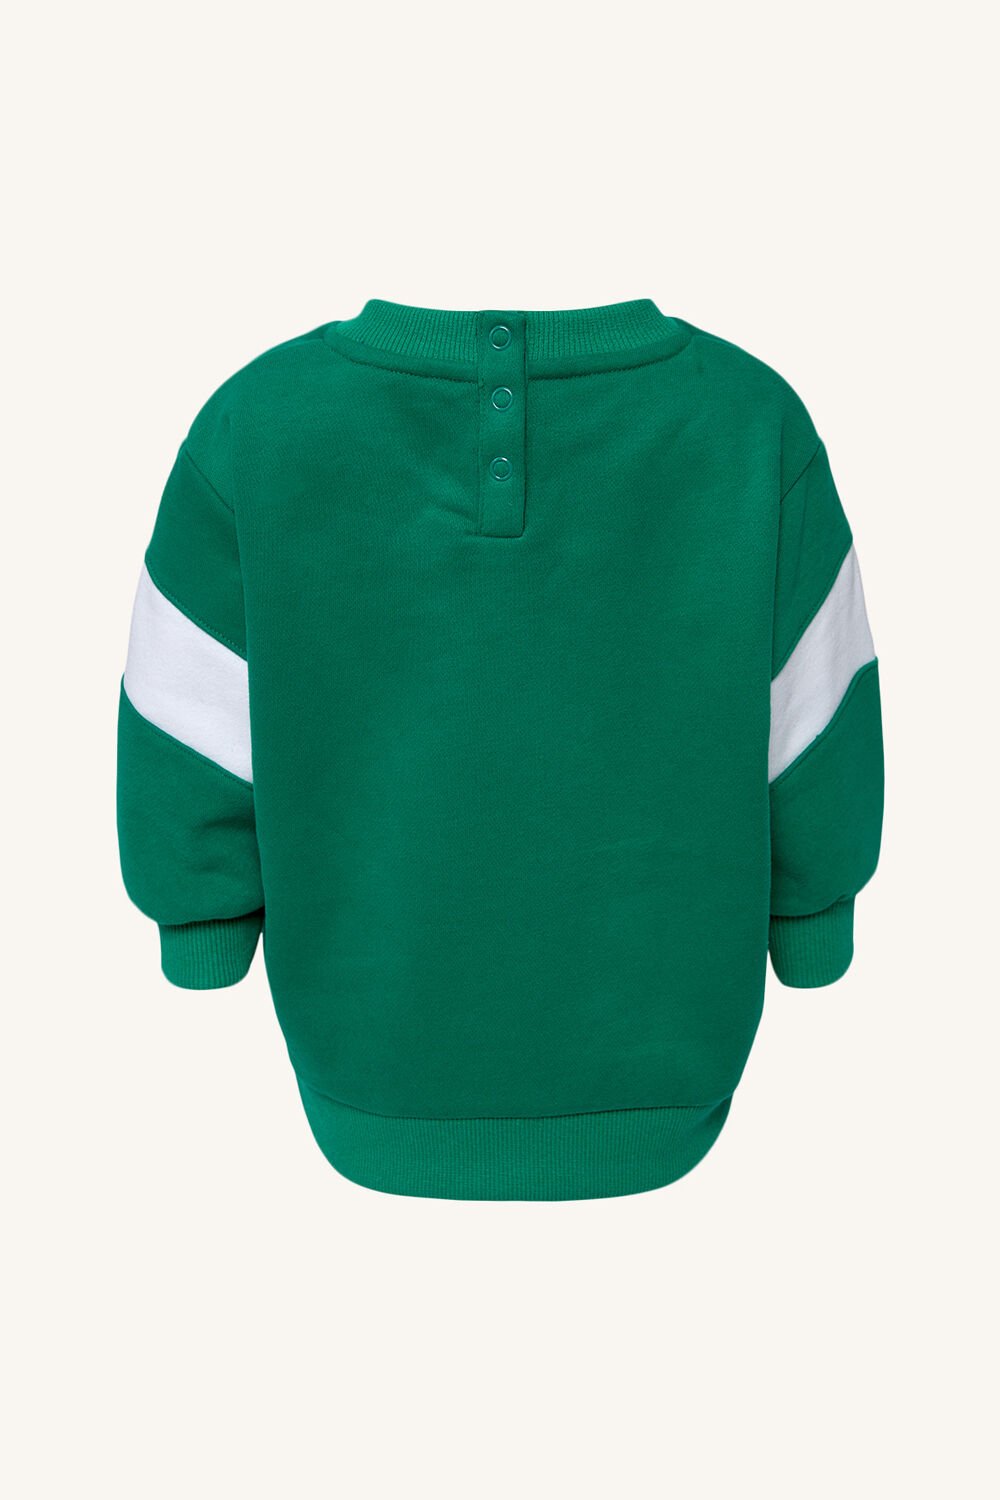 OVERSIZED TRACK SWEATER in colour DEEP GRASS GREEN